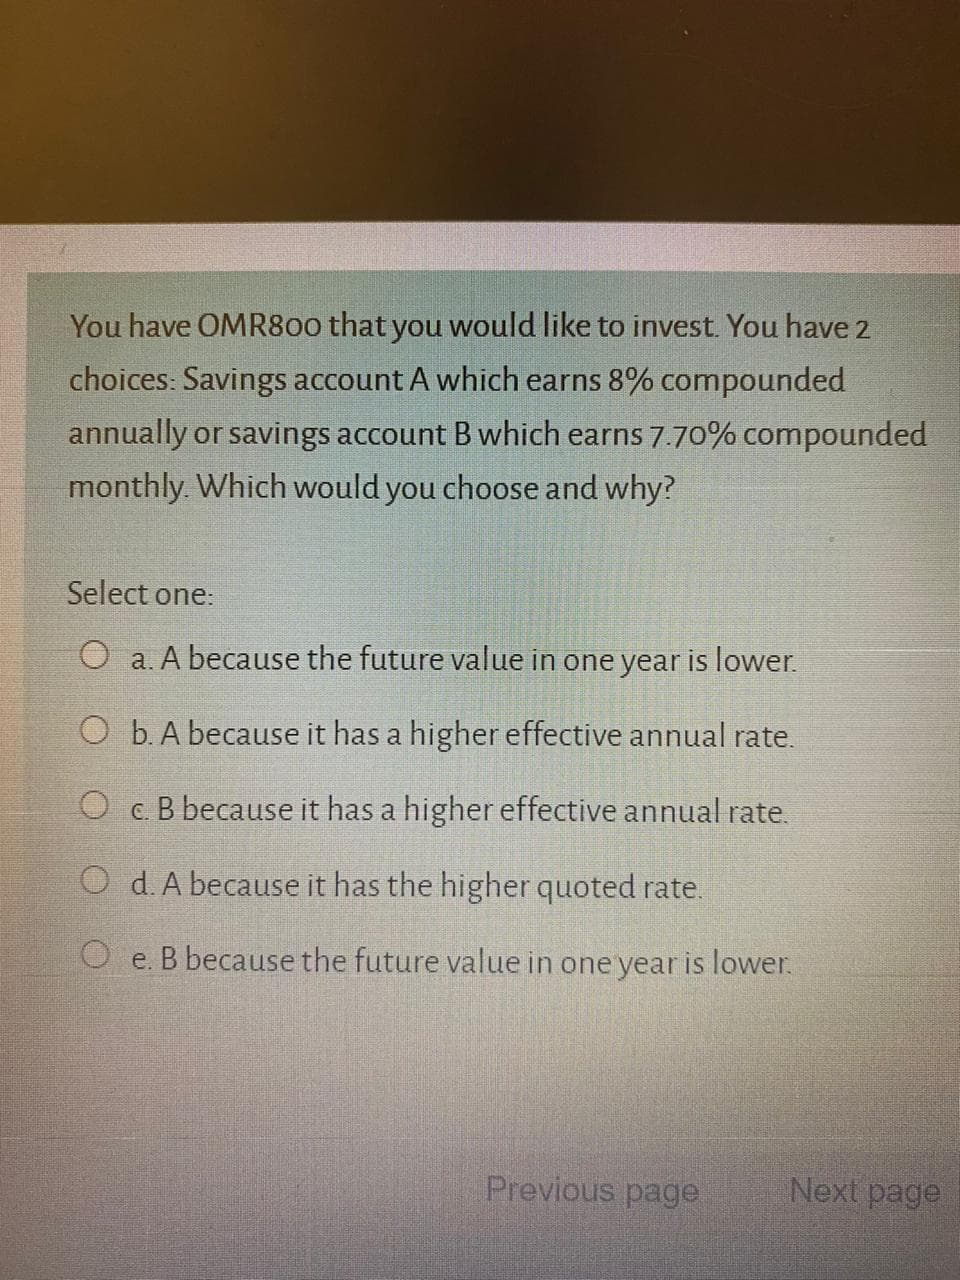 You have OMR800 that you would like to invest. You have 2
choices: Savings account A which earns 8% compounded
annually or savings account B which earns 7.70% compounded
monthly. Which would you choose and why?
Select one:
O a. A because the future value in one year is lower.
O b. A because it has a higher effective annual rate.
O c. B because it has a higher effective annual rate.
O d. A because it has the higher quoted rate.
O e. B because the future value in one year is lower.
